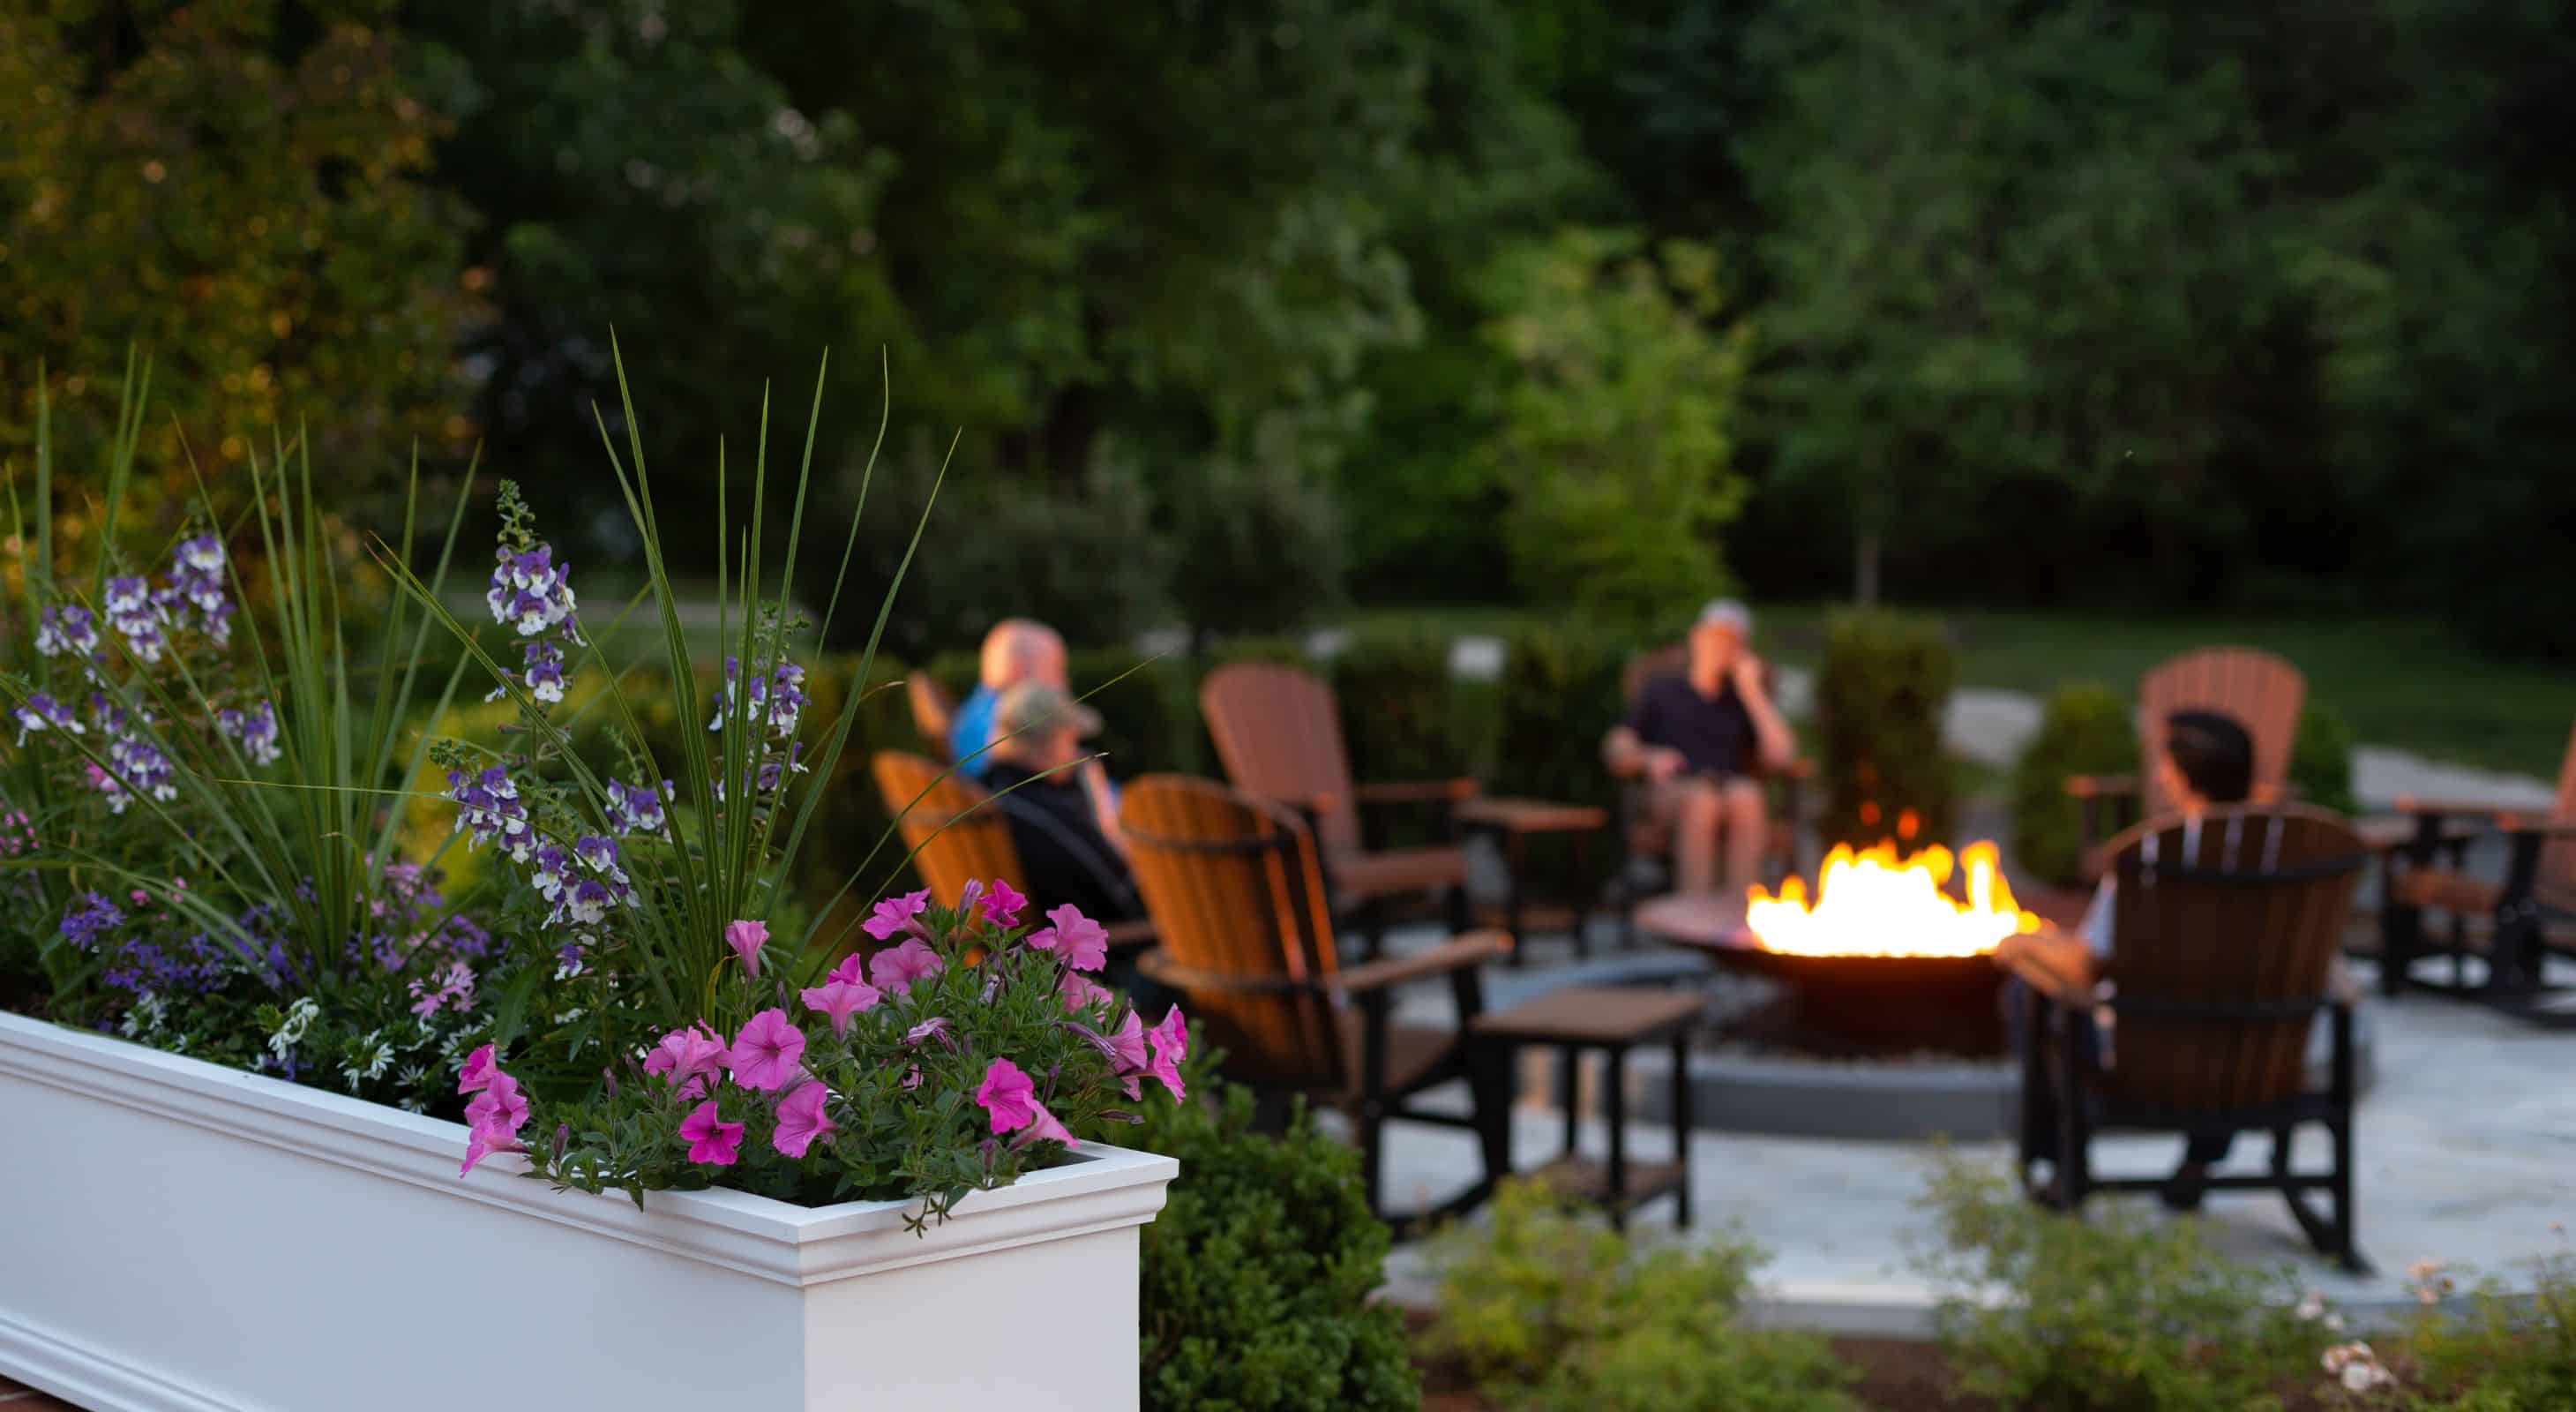 White flower box with pink flowers and group of people sitting in wooden Adirondack chairs around a fire pit in the background